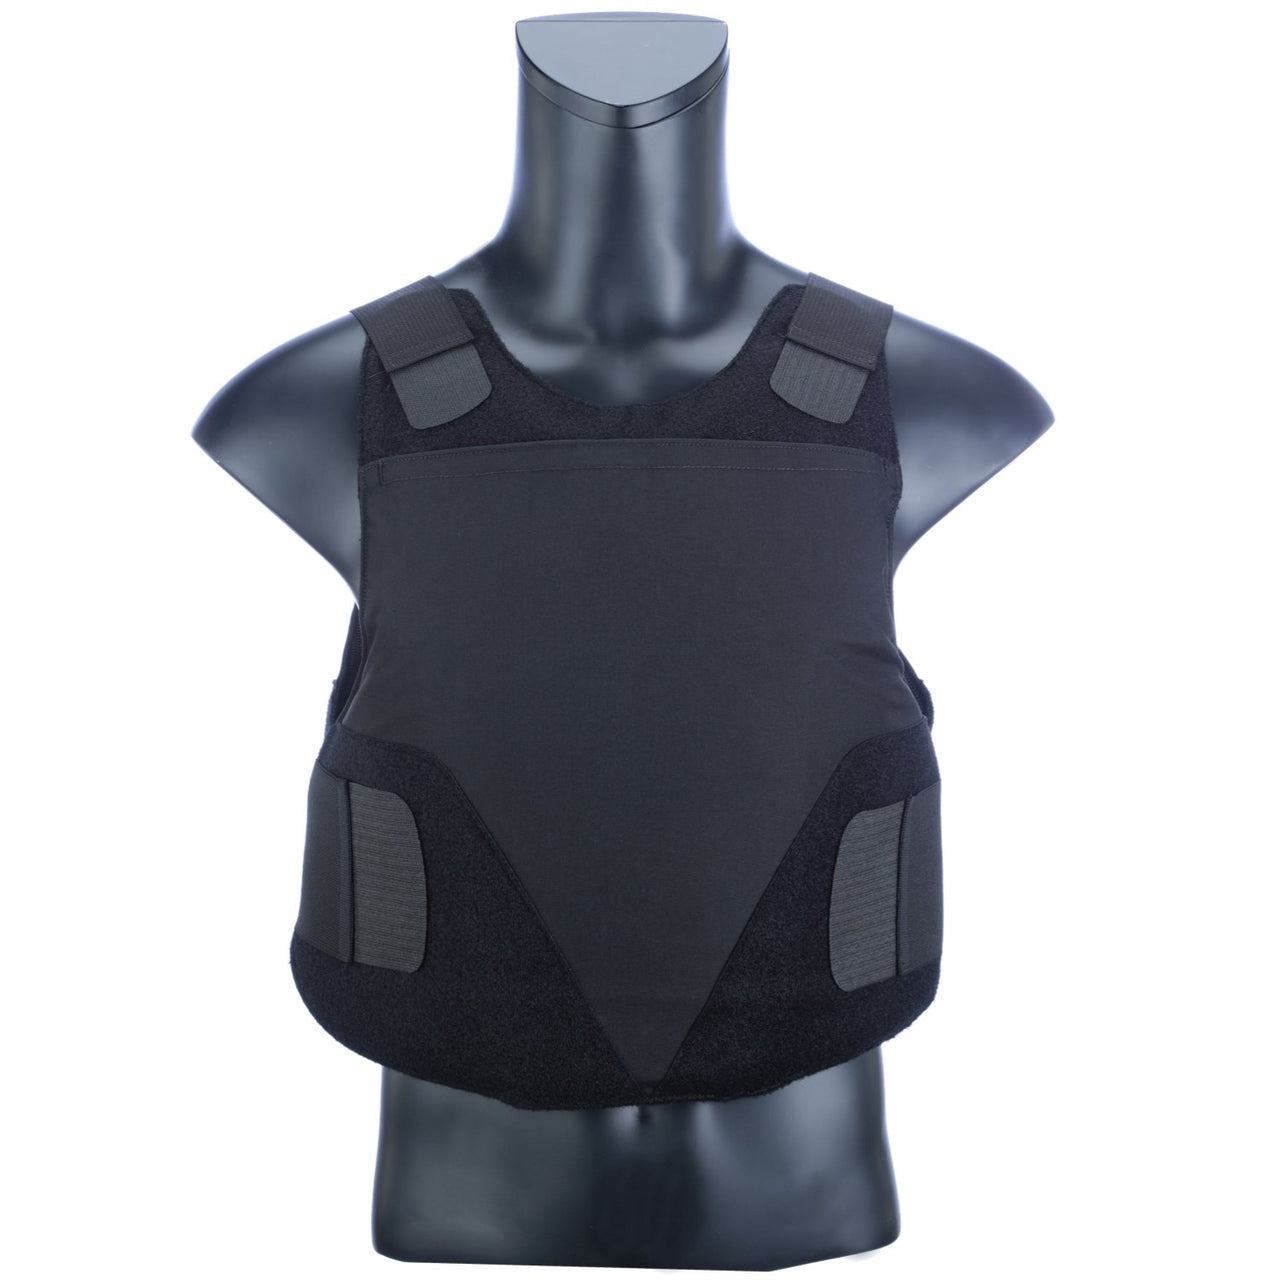 A mannequin wearing a Body Armor Direct All American Concealable Enhanced Multi-Threat Vest.